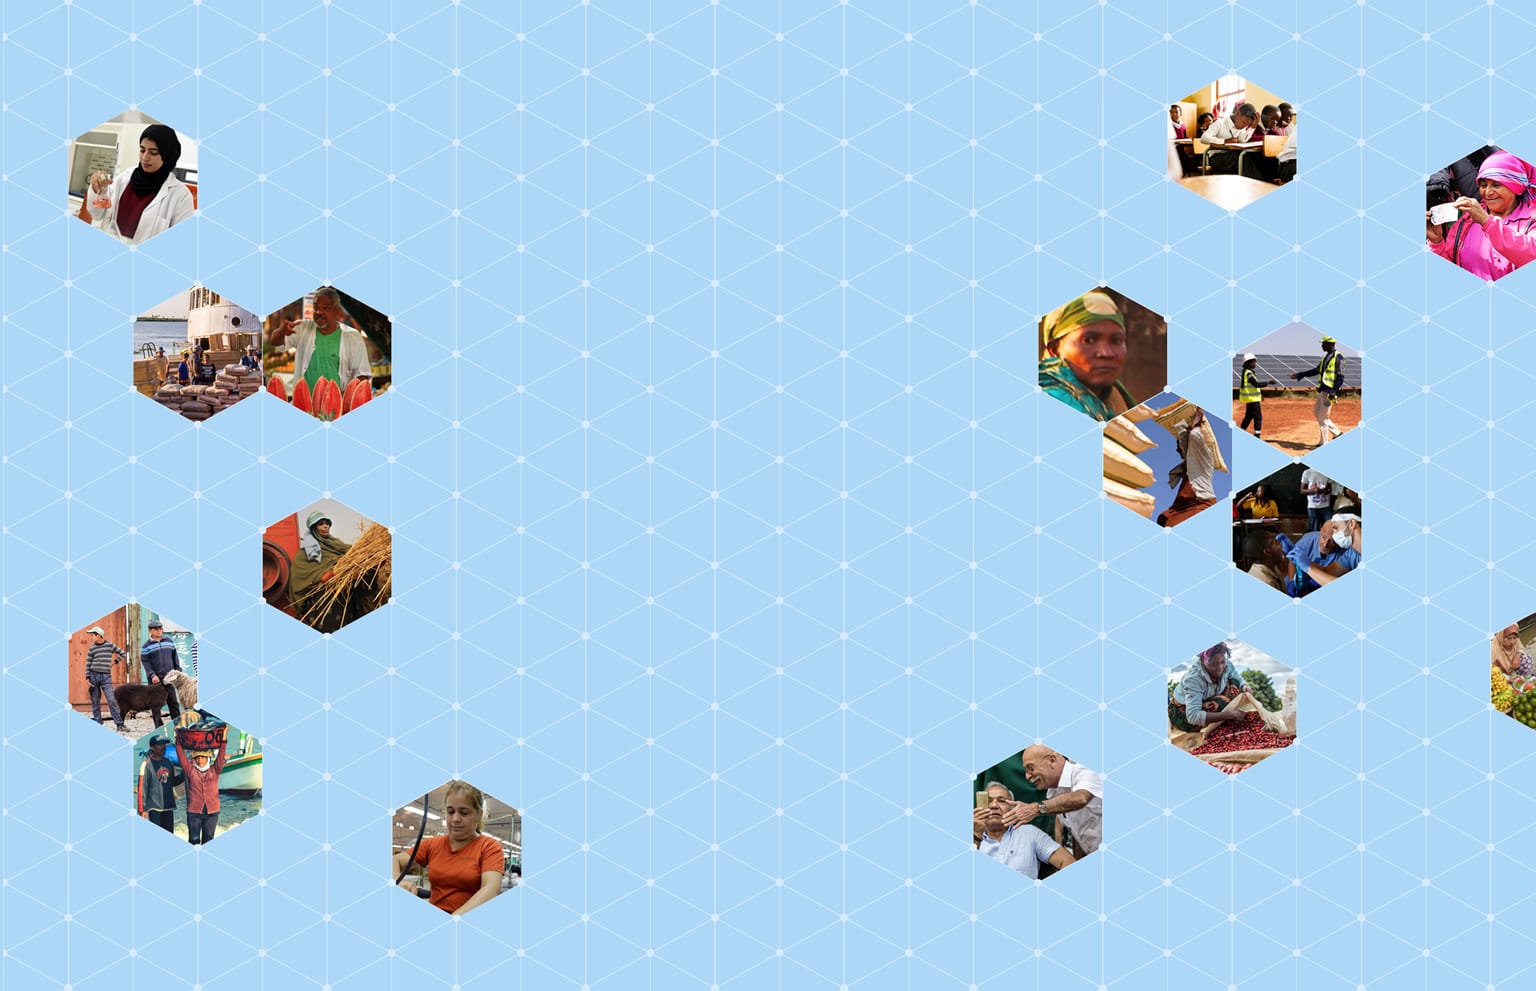 Collage showing many small images of a diverse range of people, interconnected on a geometric grid